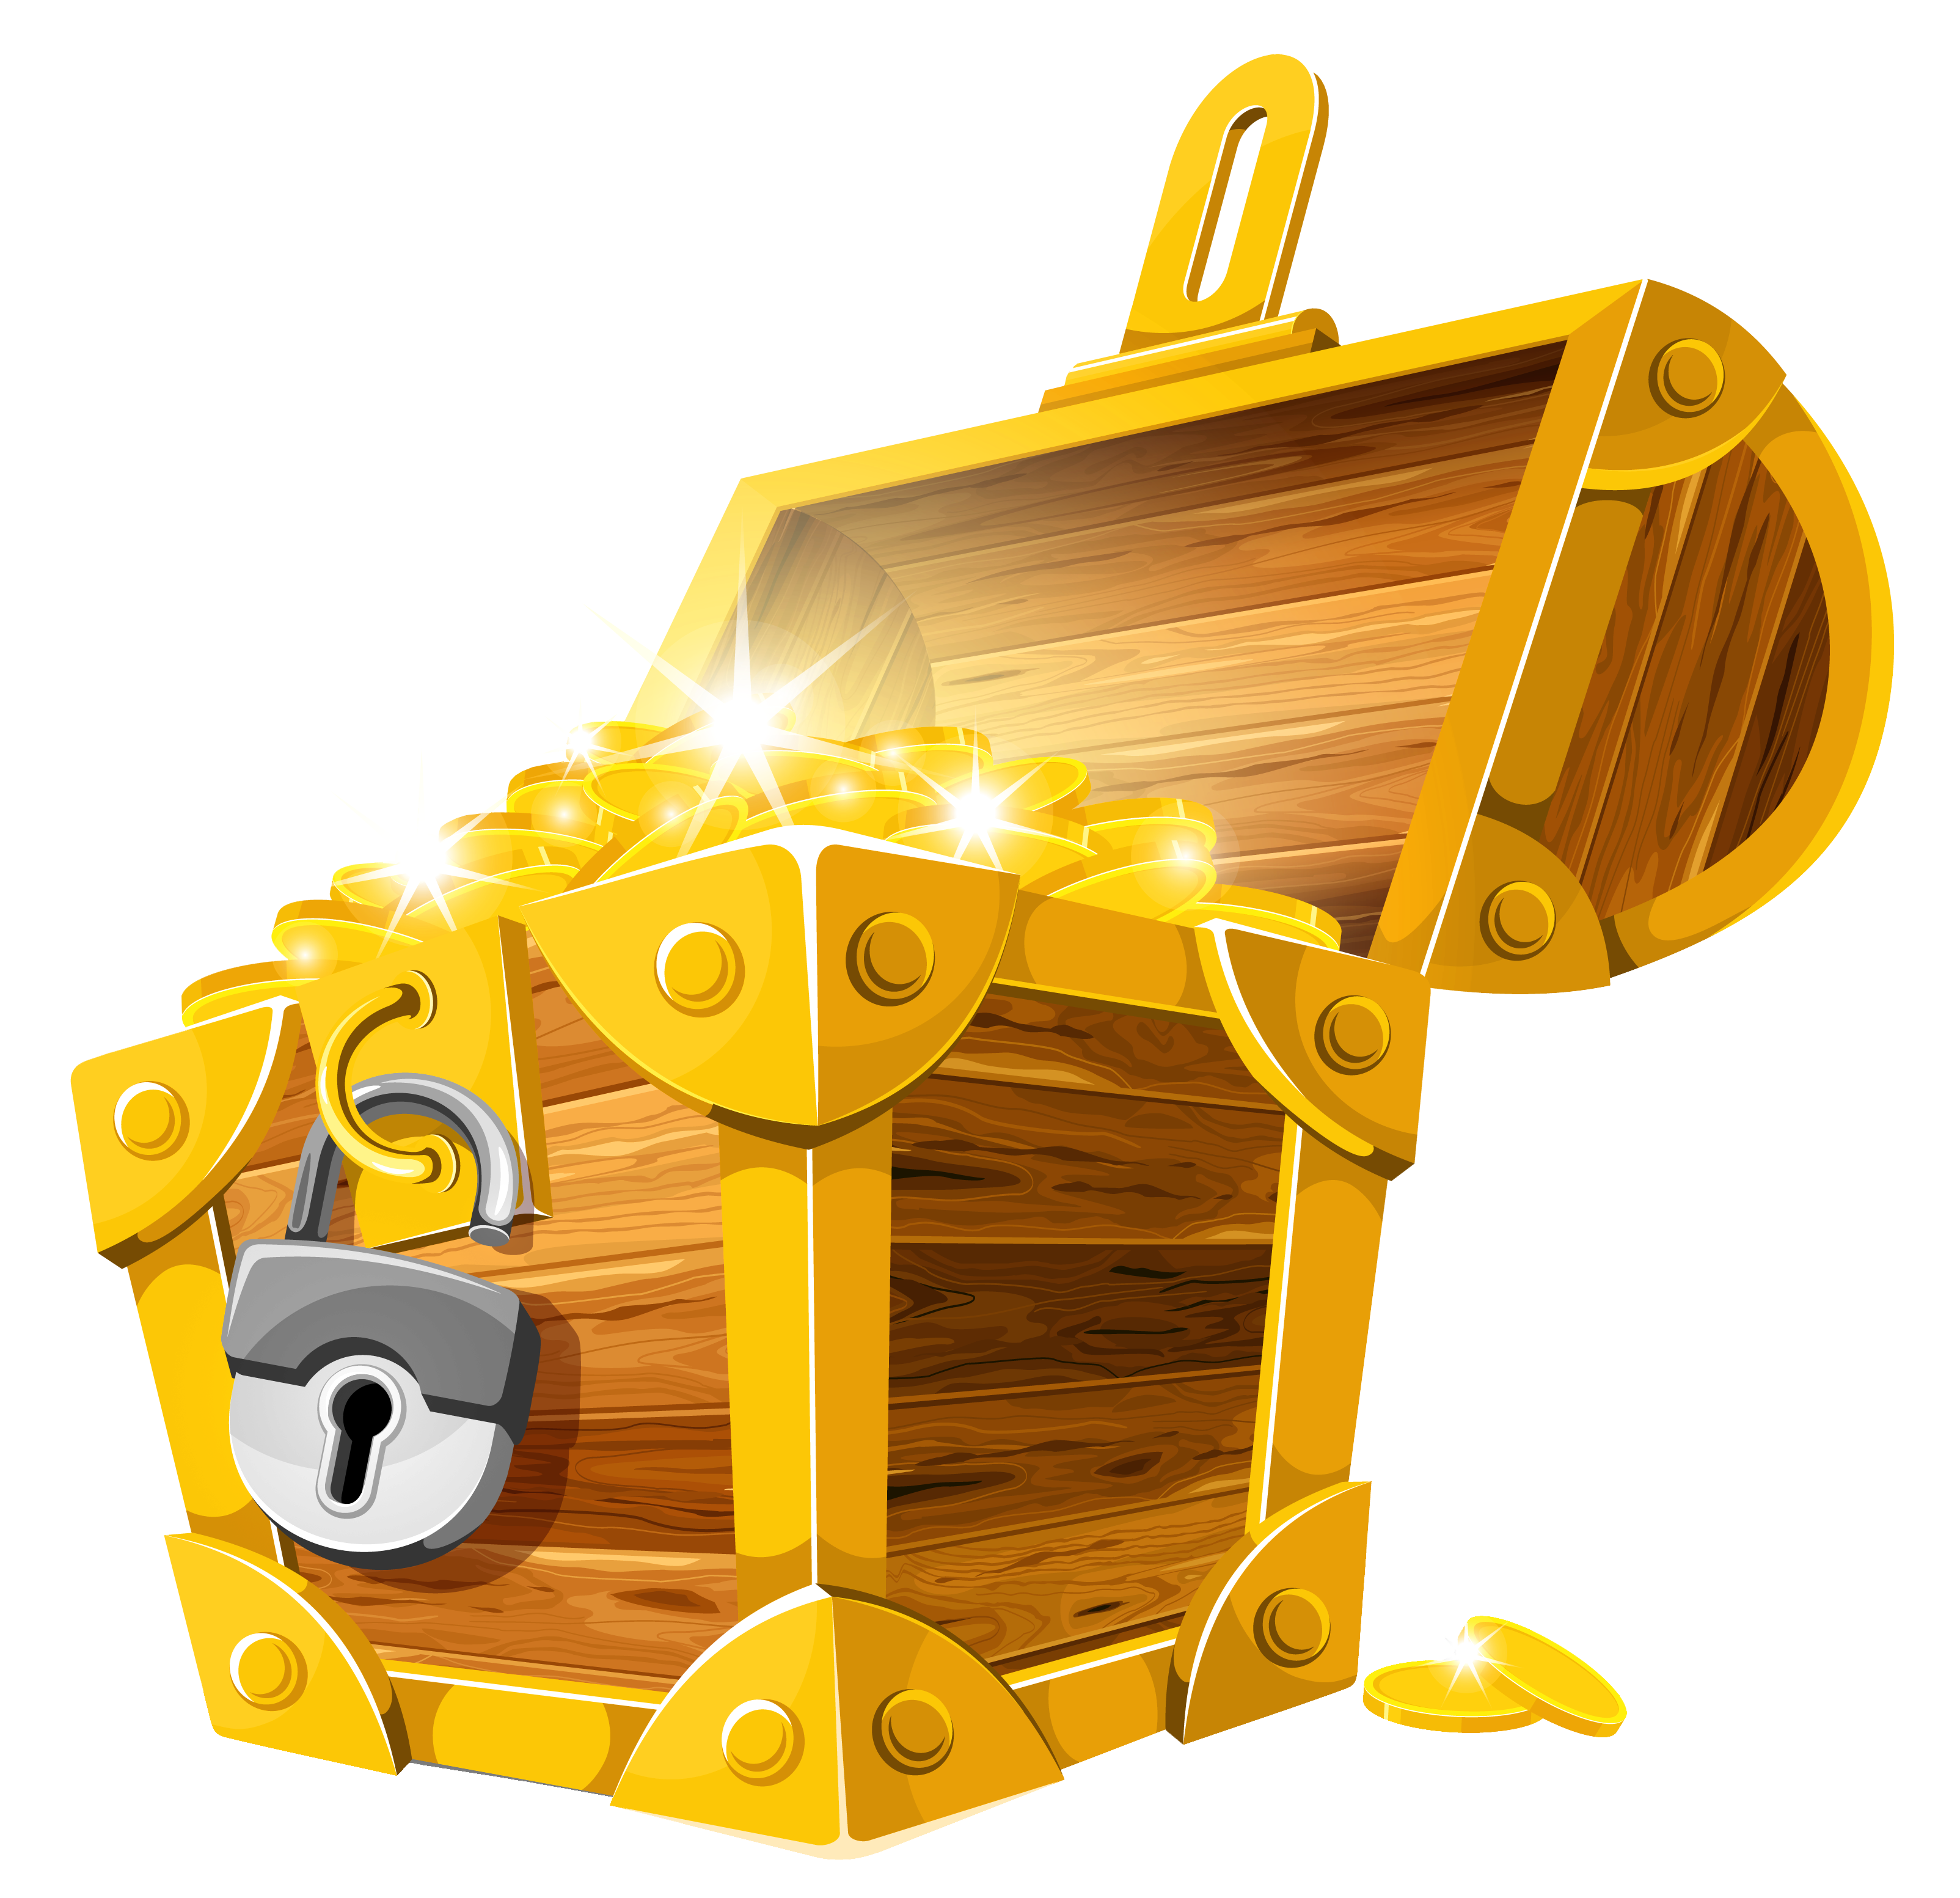 Gold Coins Treasure Chest PNG Clipart Picture | Gallery ...